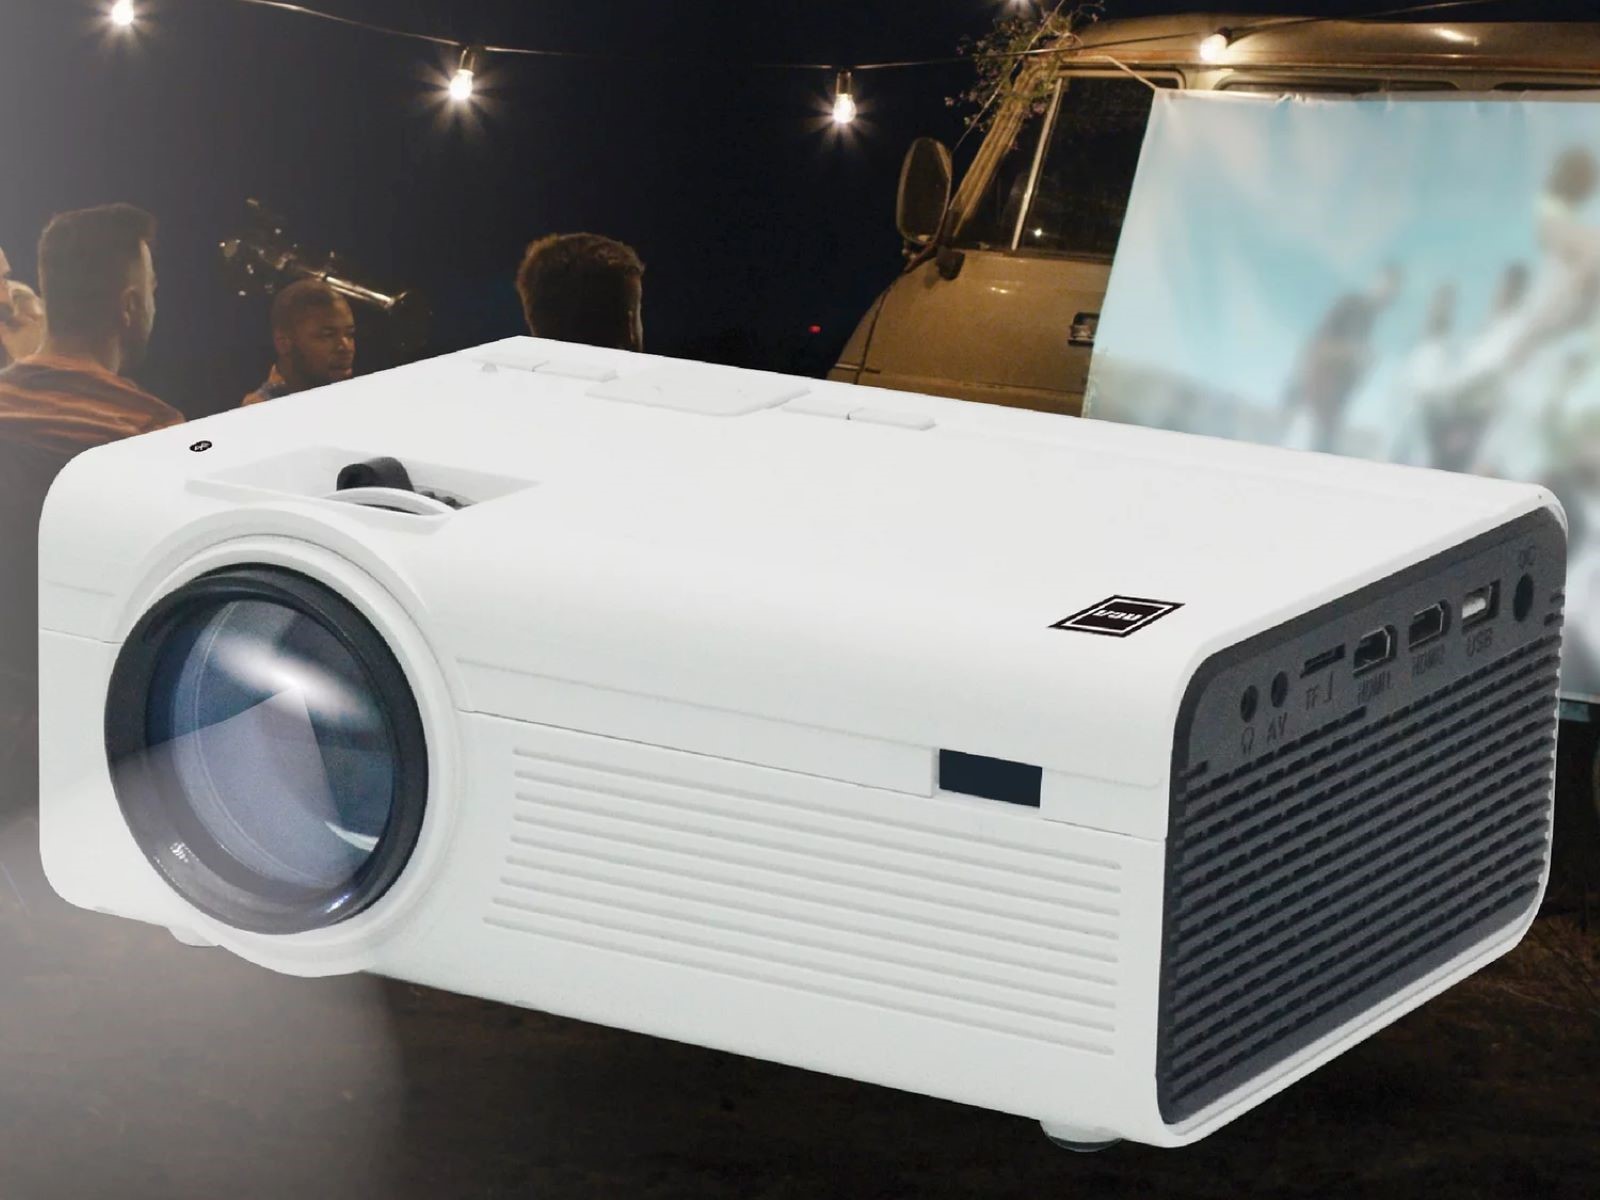 Connecting IPhone To RCA Home Theater Projector: Step-by-Step Guide